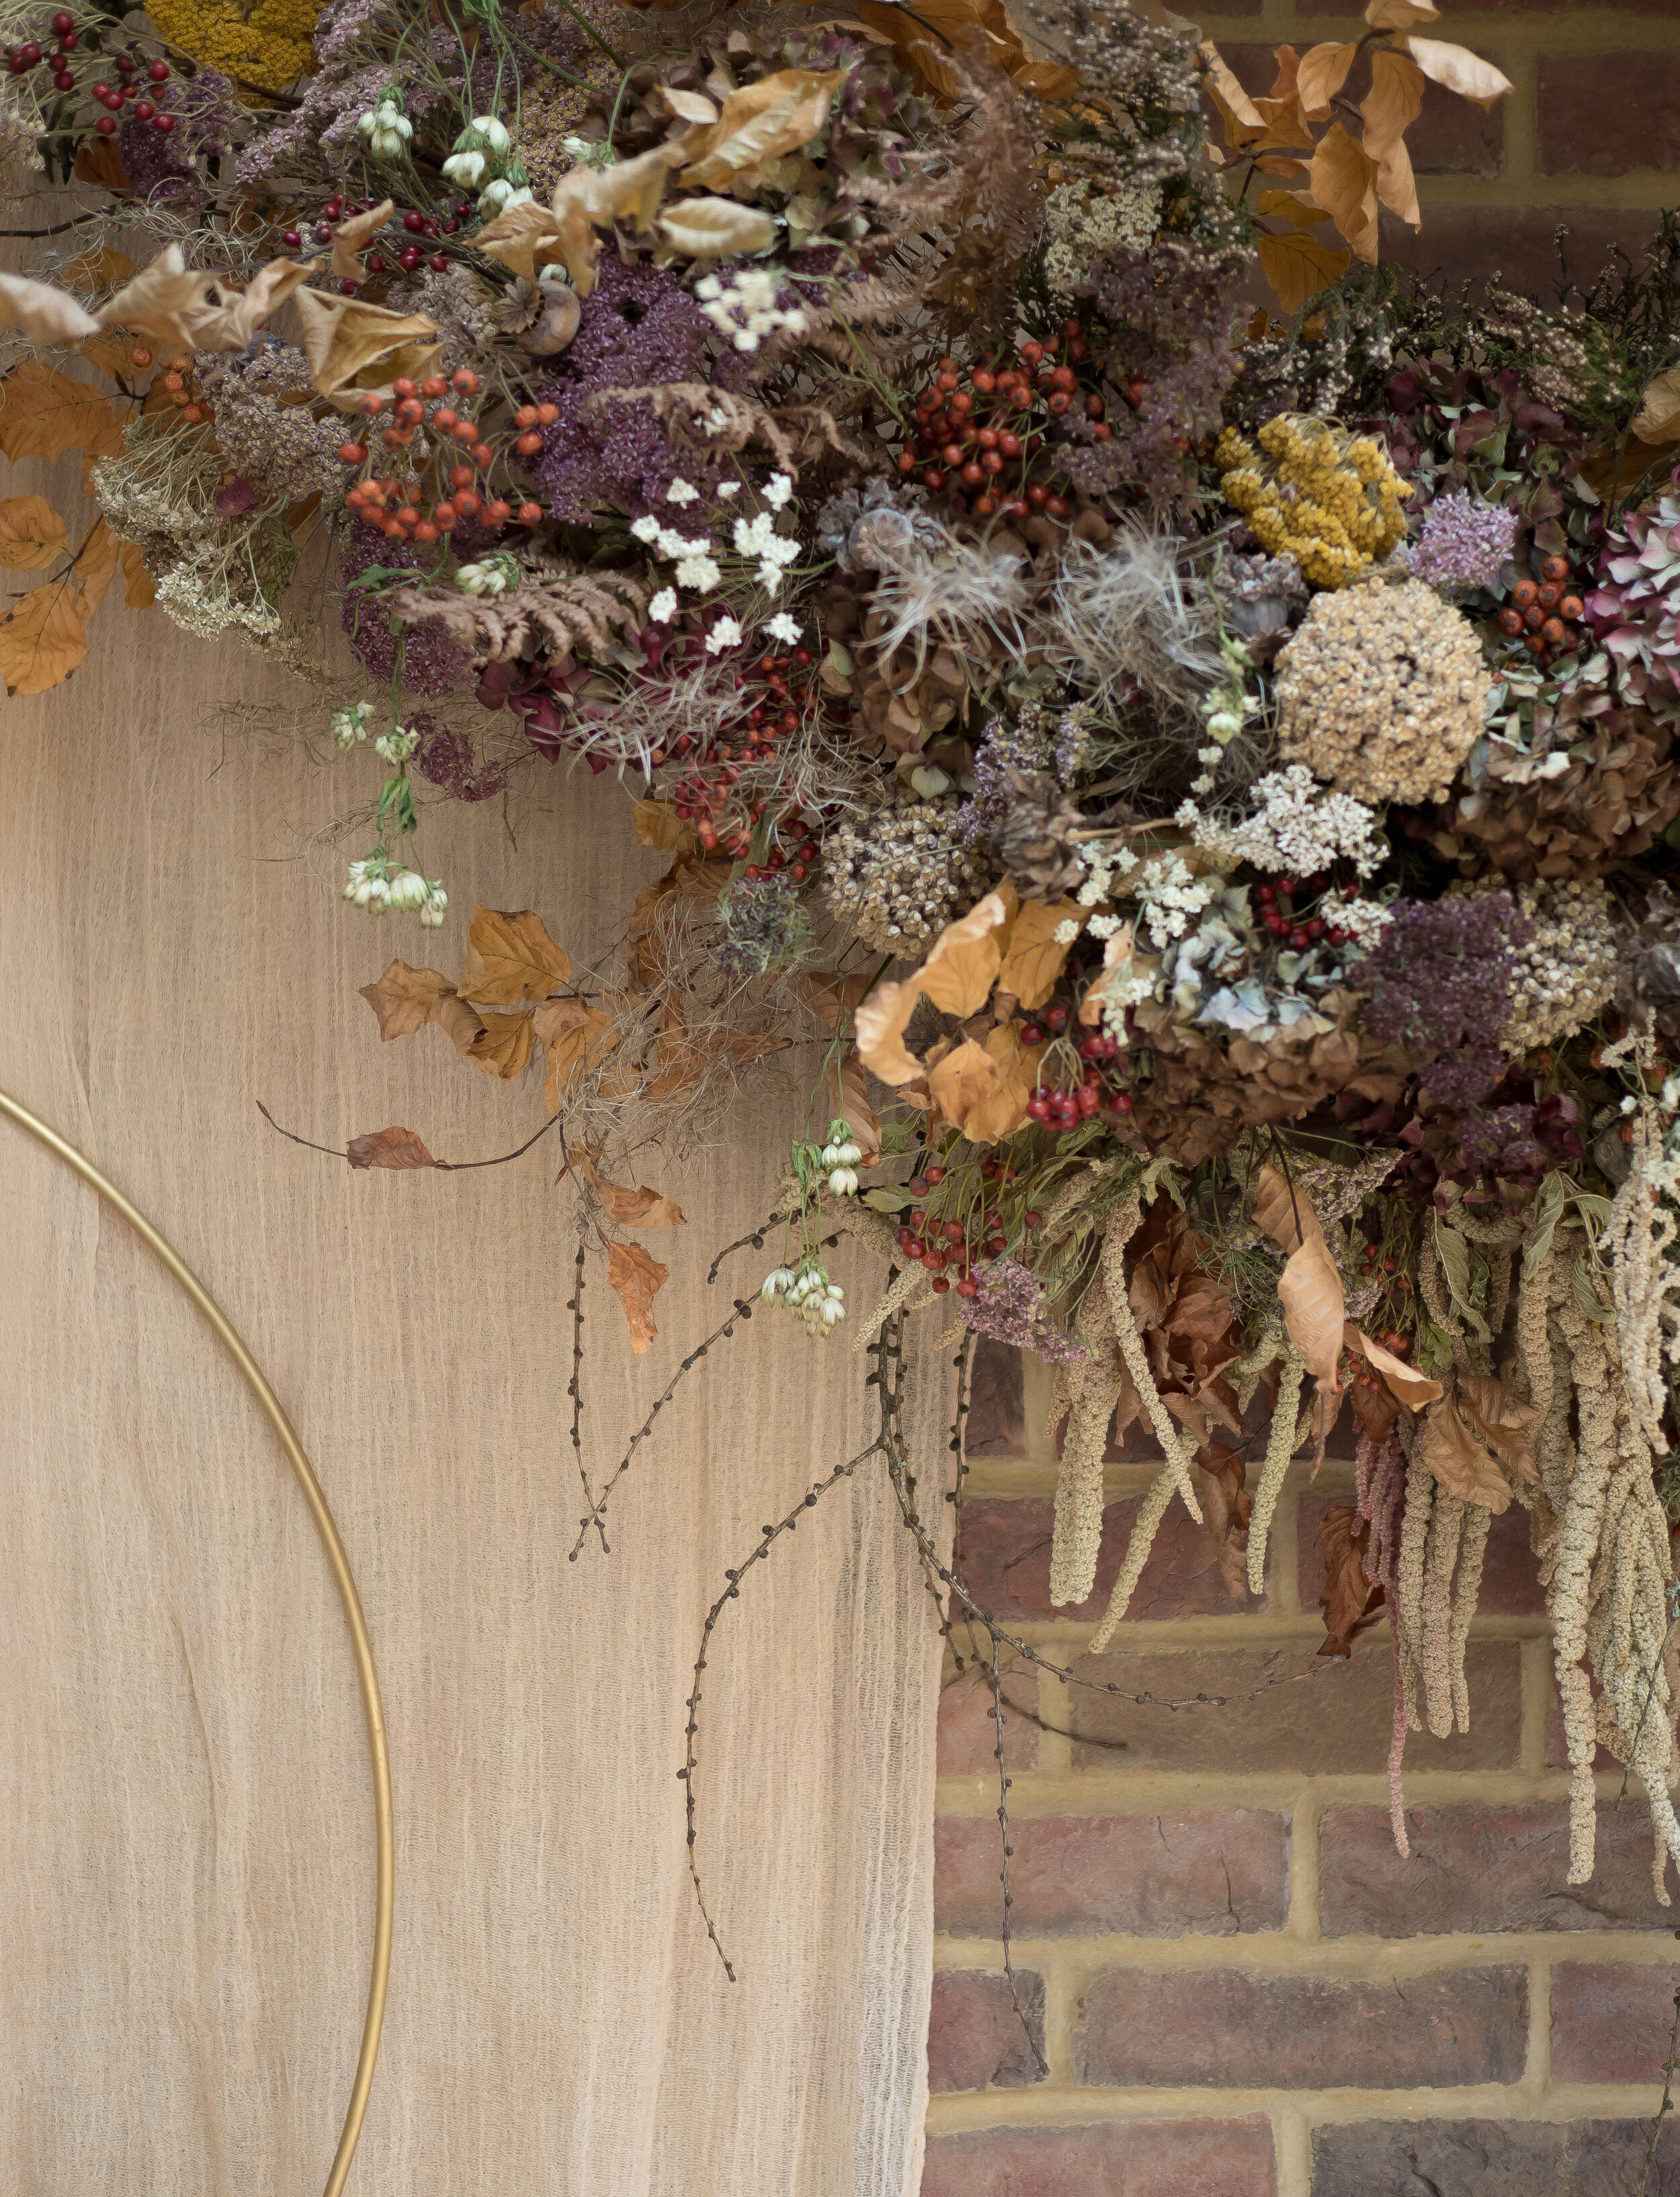 How to Care for Everlasting Dried Flowers